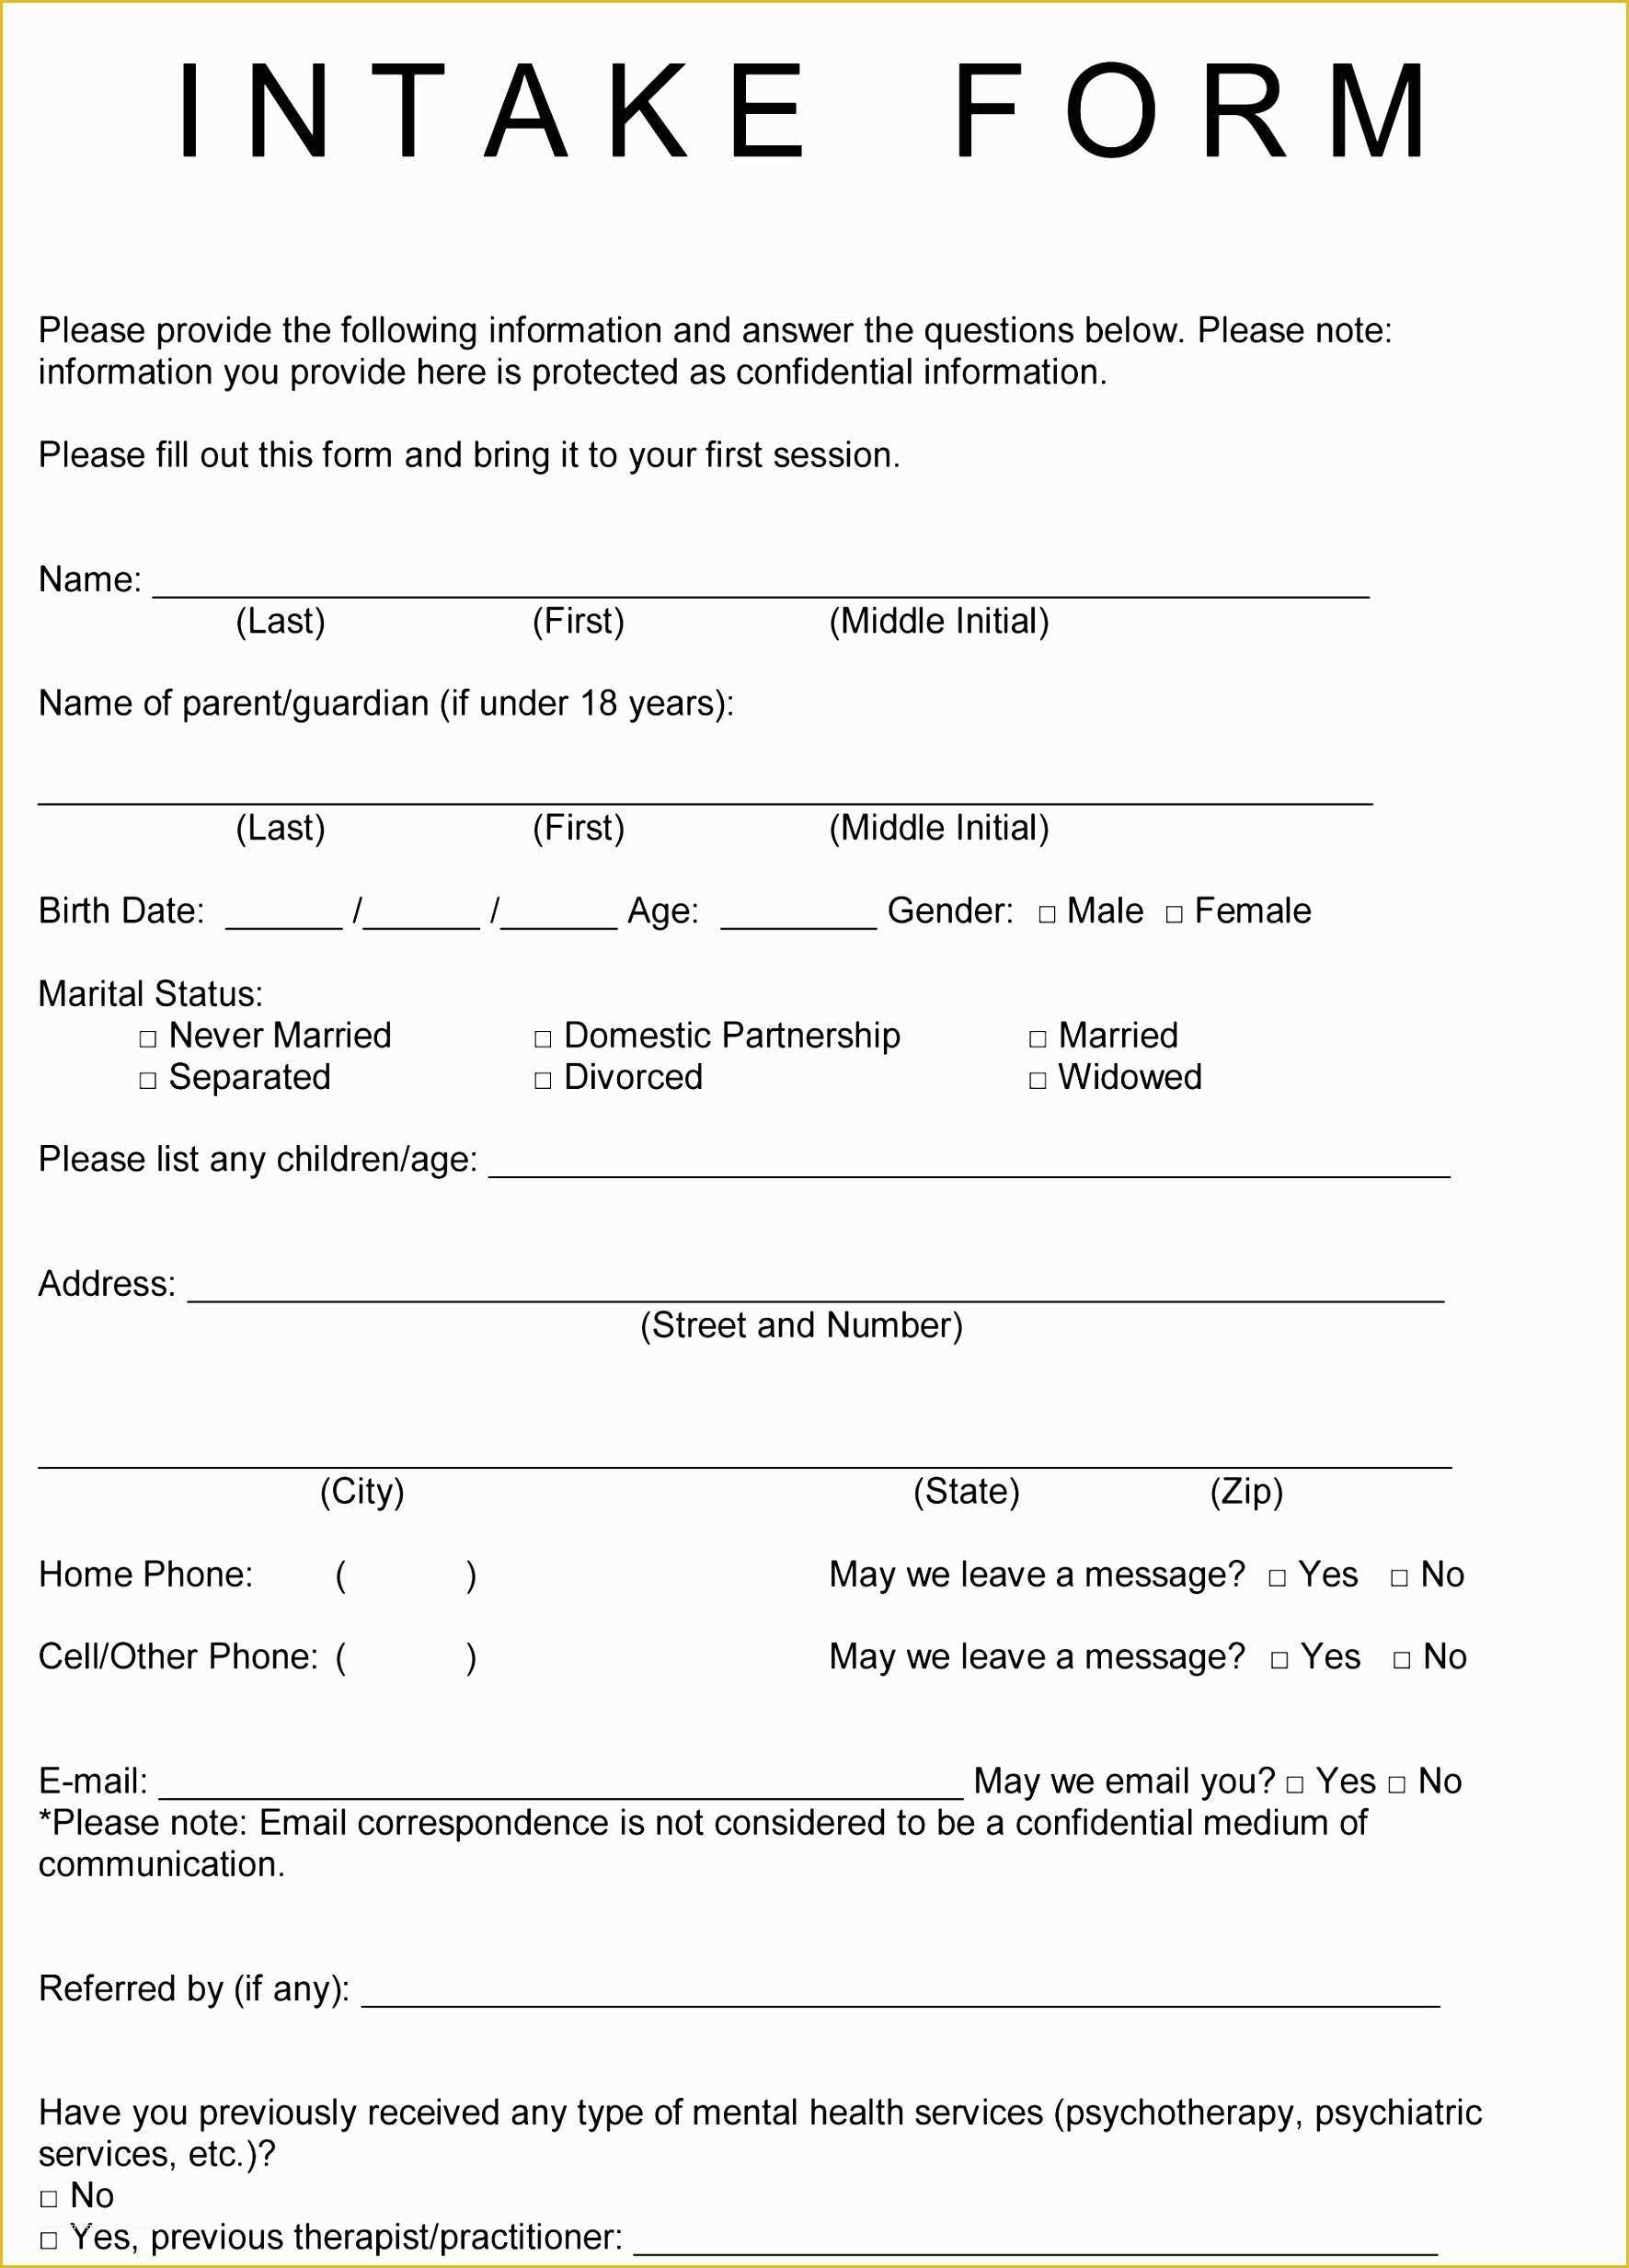 free-patient-intake-form-template-of-5-massage-therapy-intake-form